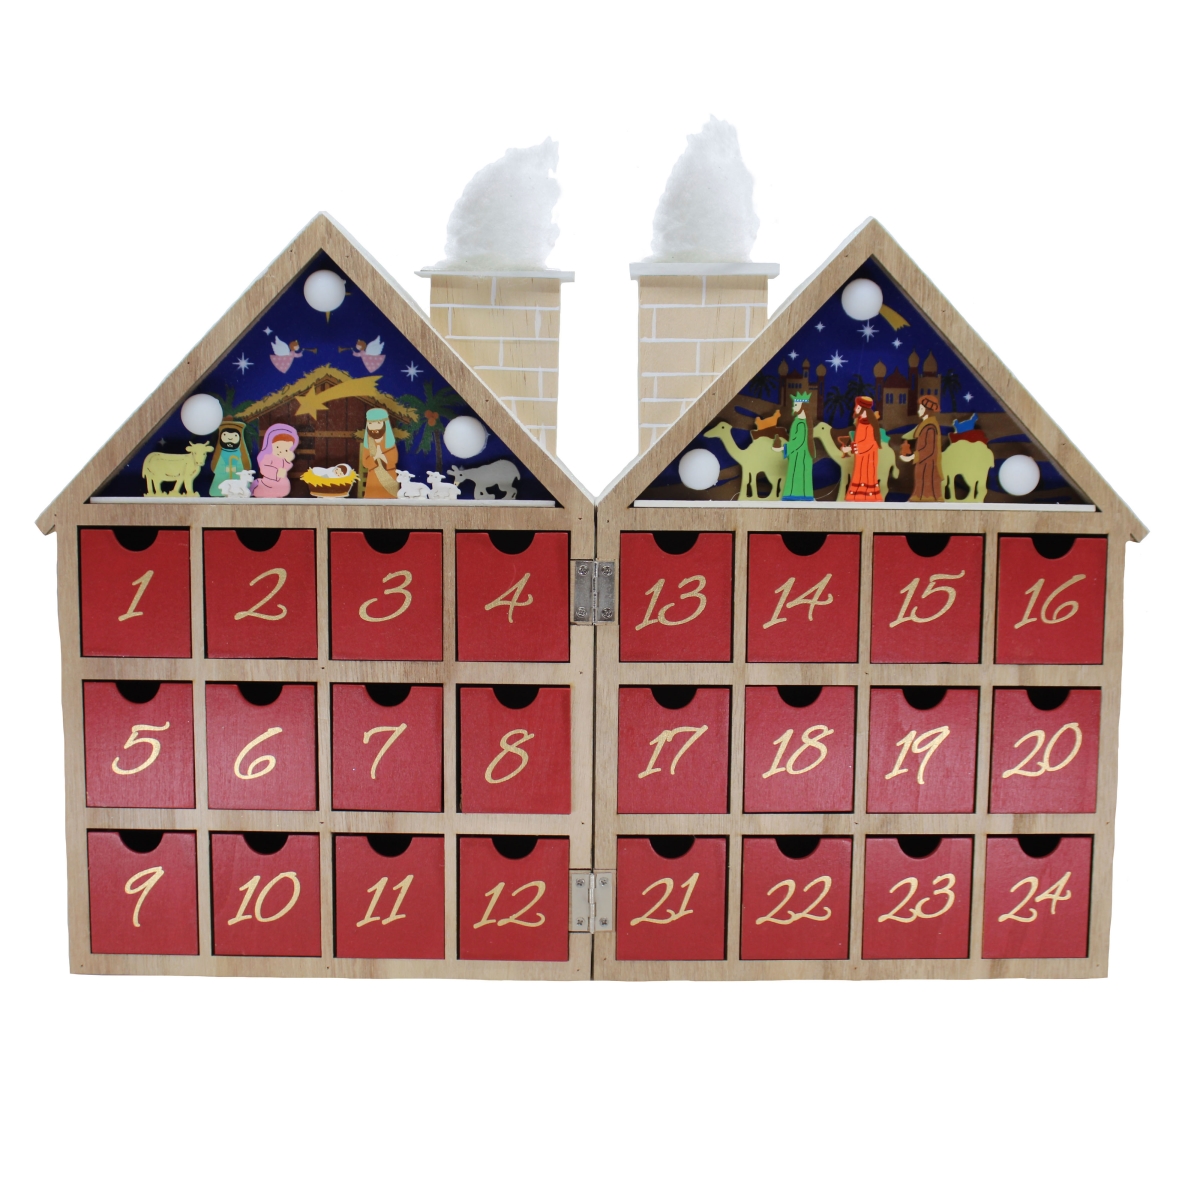 Picture of Kurt S. Adler D3699 11.81 in. Battery-Operated Wooden LED Nativity Advent Calendar